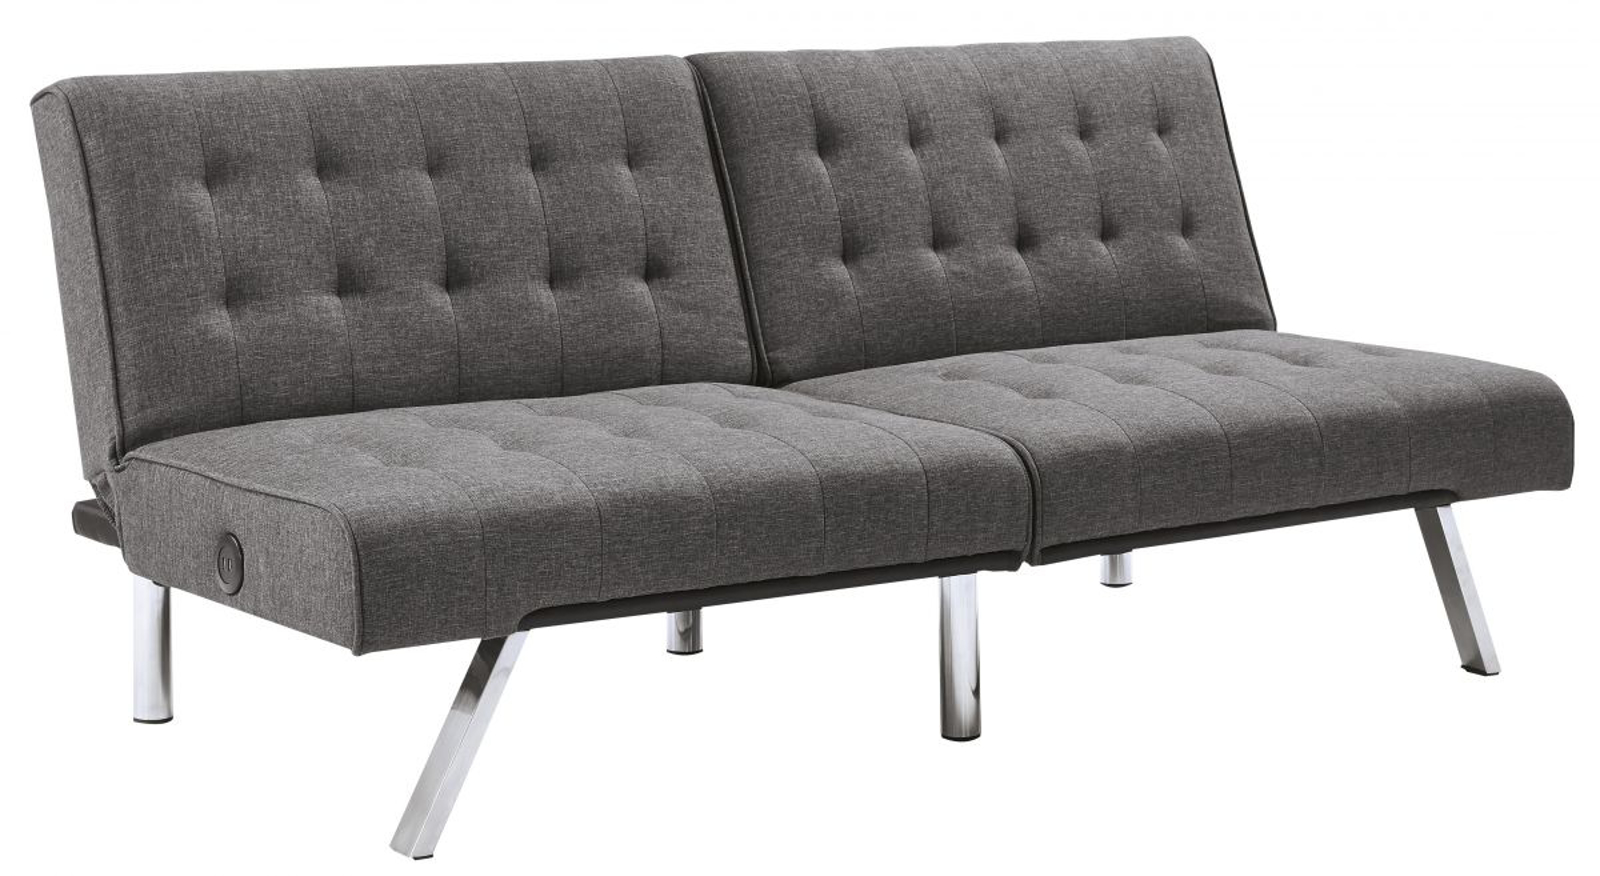 Picture of Sivley Futon Sofa Bed